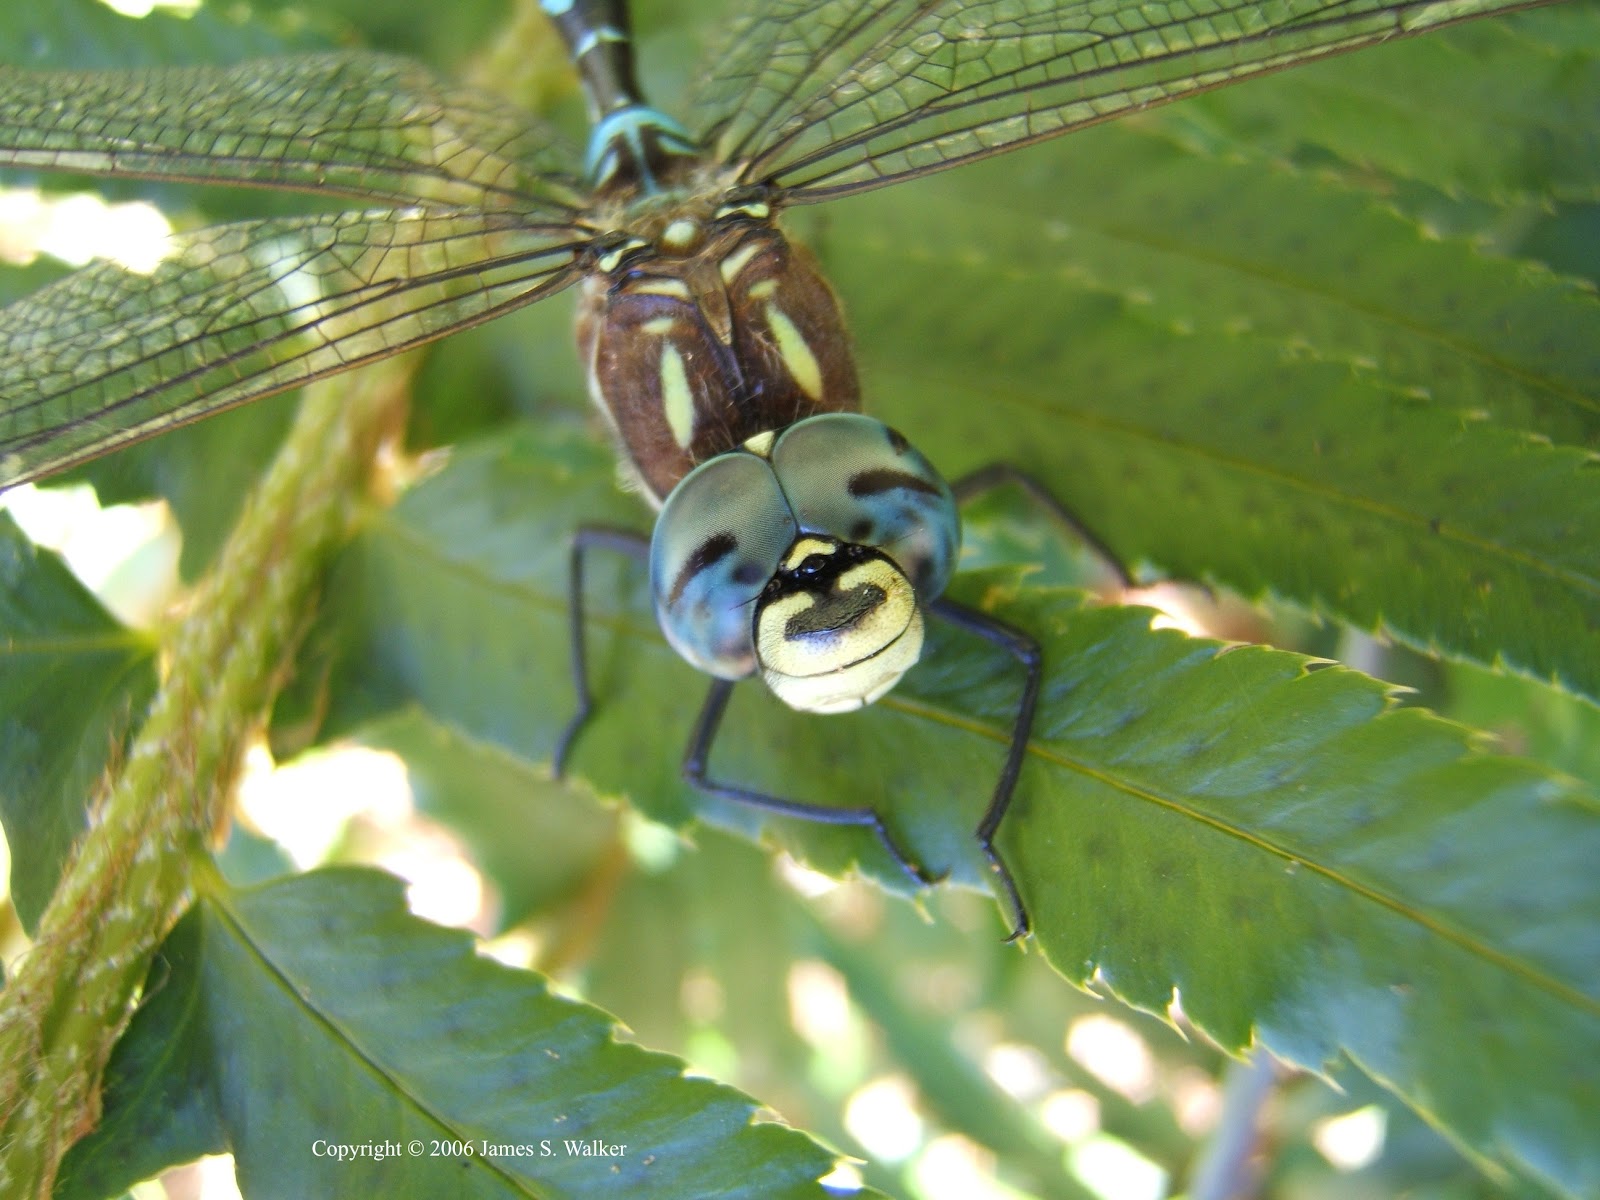 The Dragonfly Whisperer: The Happy-face Dragonfly